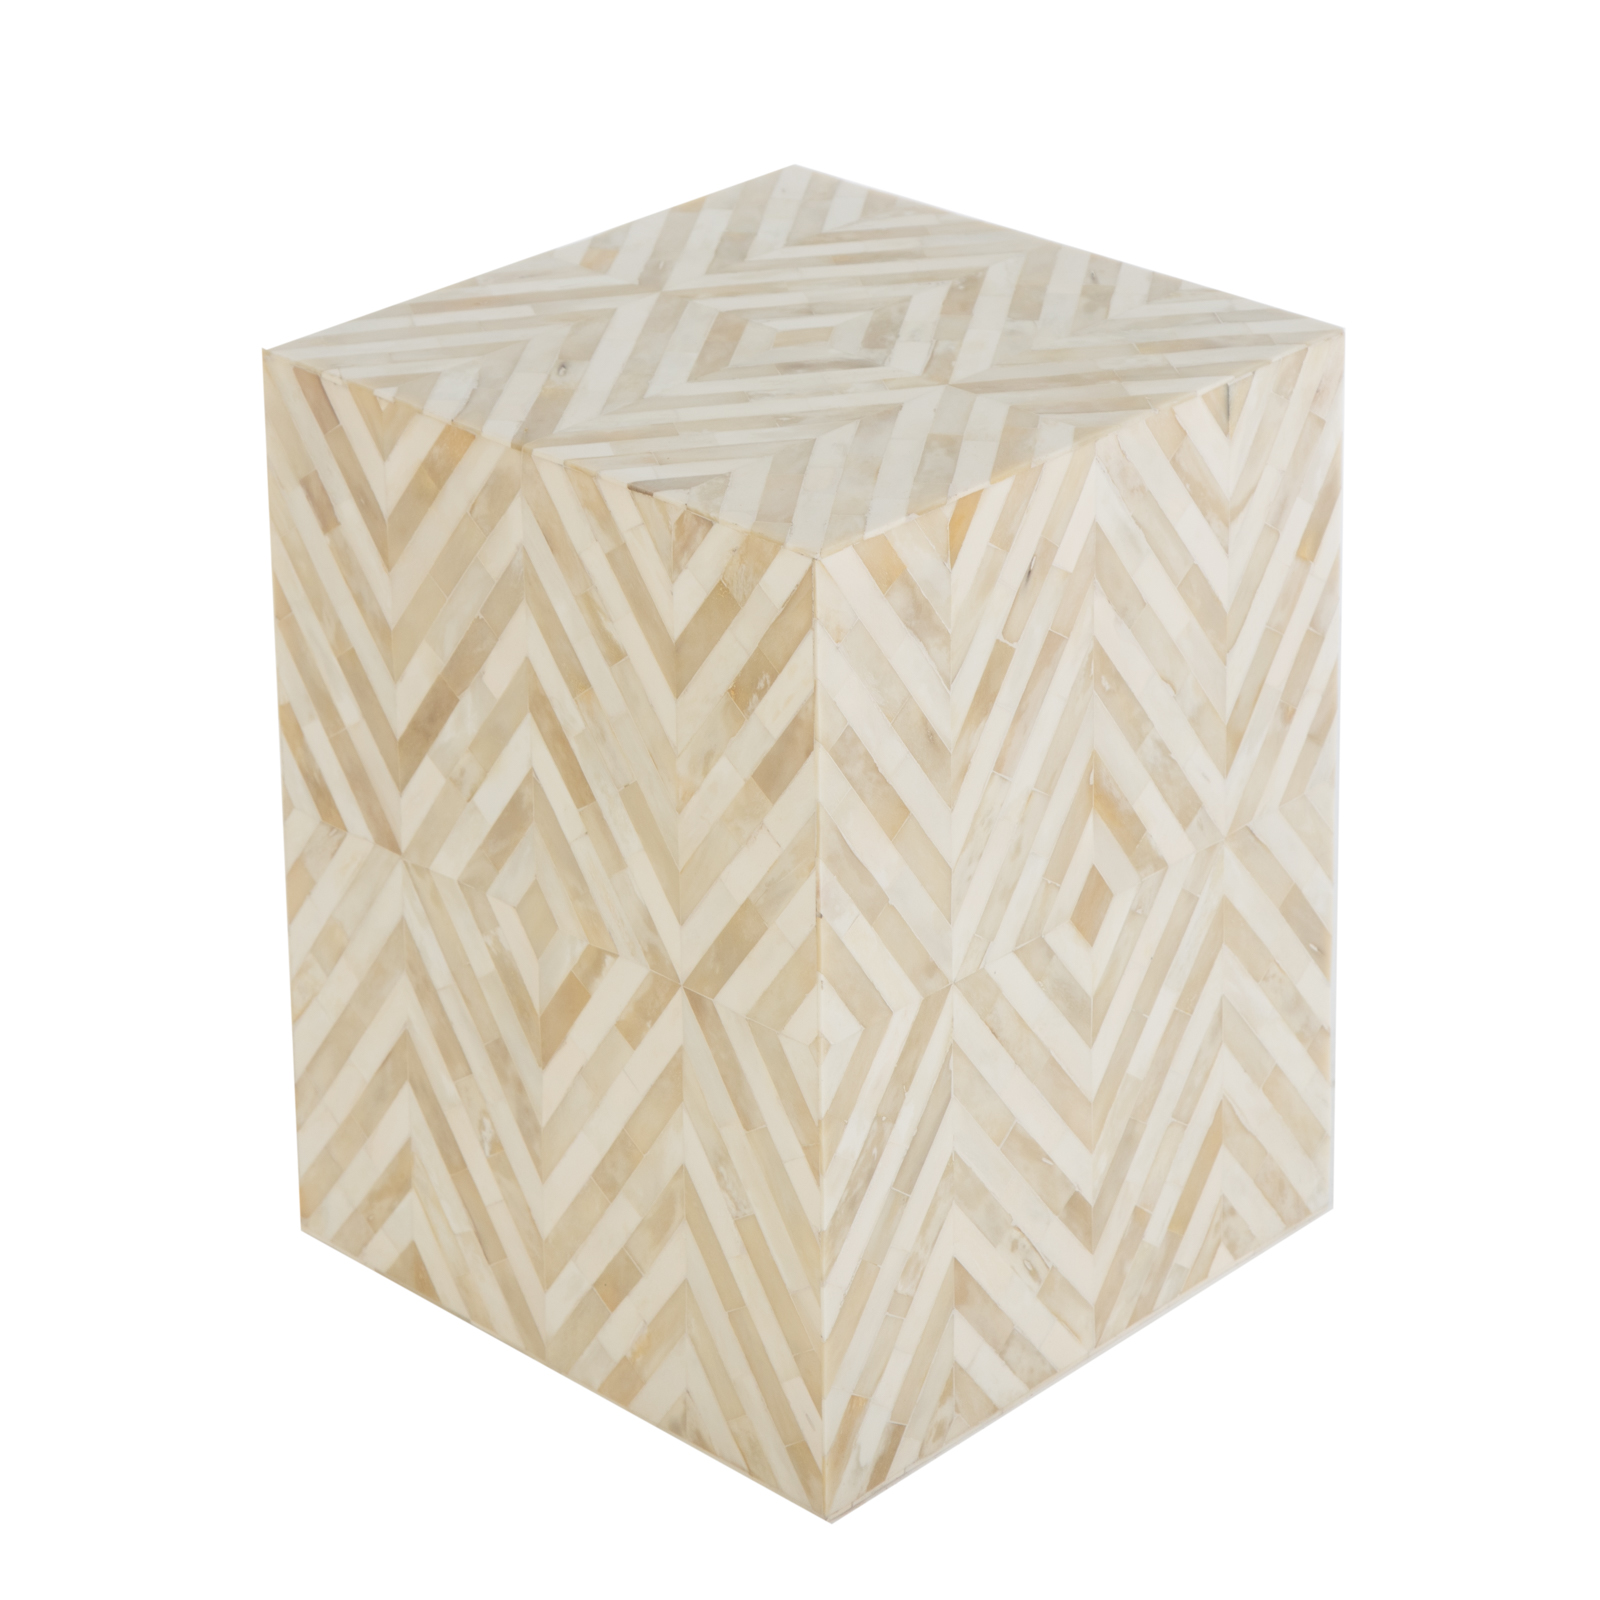 CONTEMPORARY GEOMETRIC CUBE SIDE 2875d8